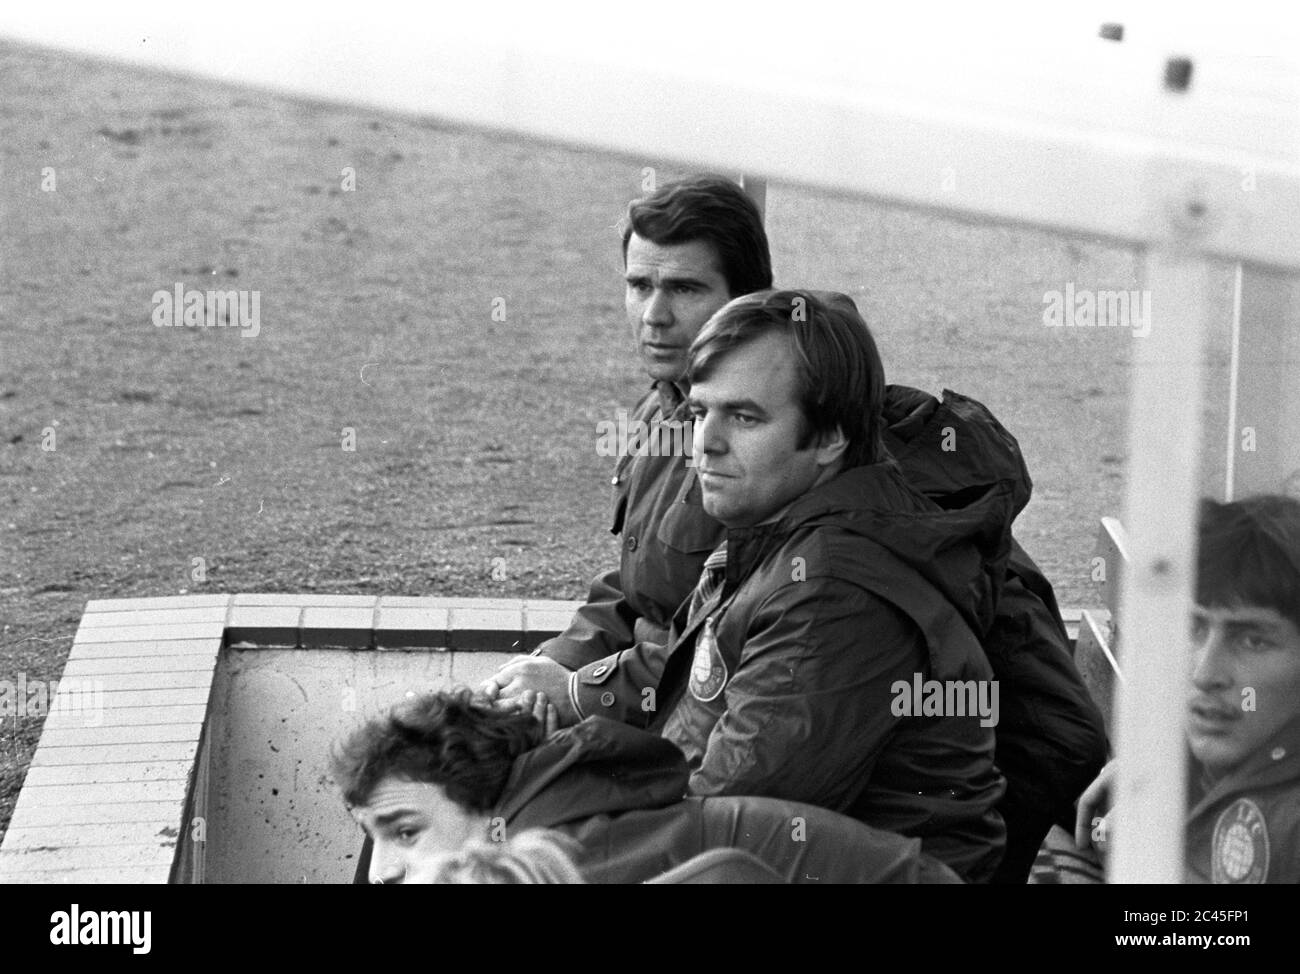 01 January 1979, Saxony, Leipzig: Lok-Bank: Goalkeeper René Müller (far right), co-trainer Dr. Bernd Kirsche (far back) and substitute Peter Englisch (front left, half-covered), back: unknown - GDR-Oberliga top match 1. FC Lok Leipzig - FC Carl Zeiss Jena 2:1 (Oberliga 1979/1980, 13th matchday) at the Bruno-Plache-Stadium. Exact date of recording not known. Photo: Volkmar Heinz/dpa-Zentralbild/ZB Stock Photo